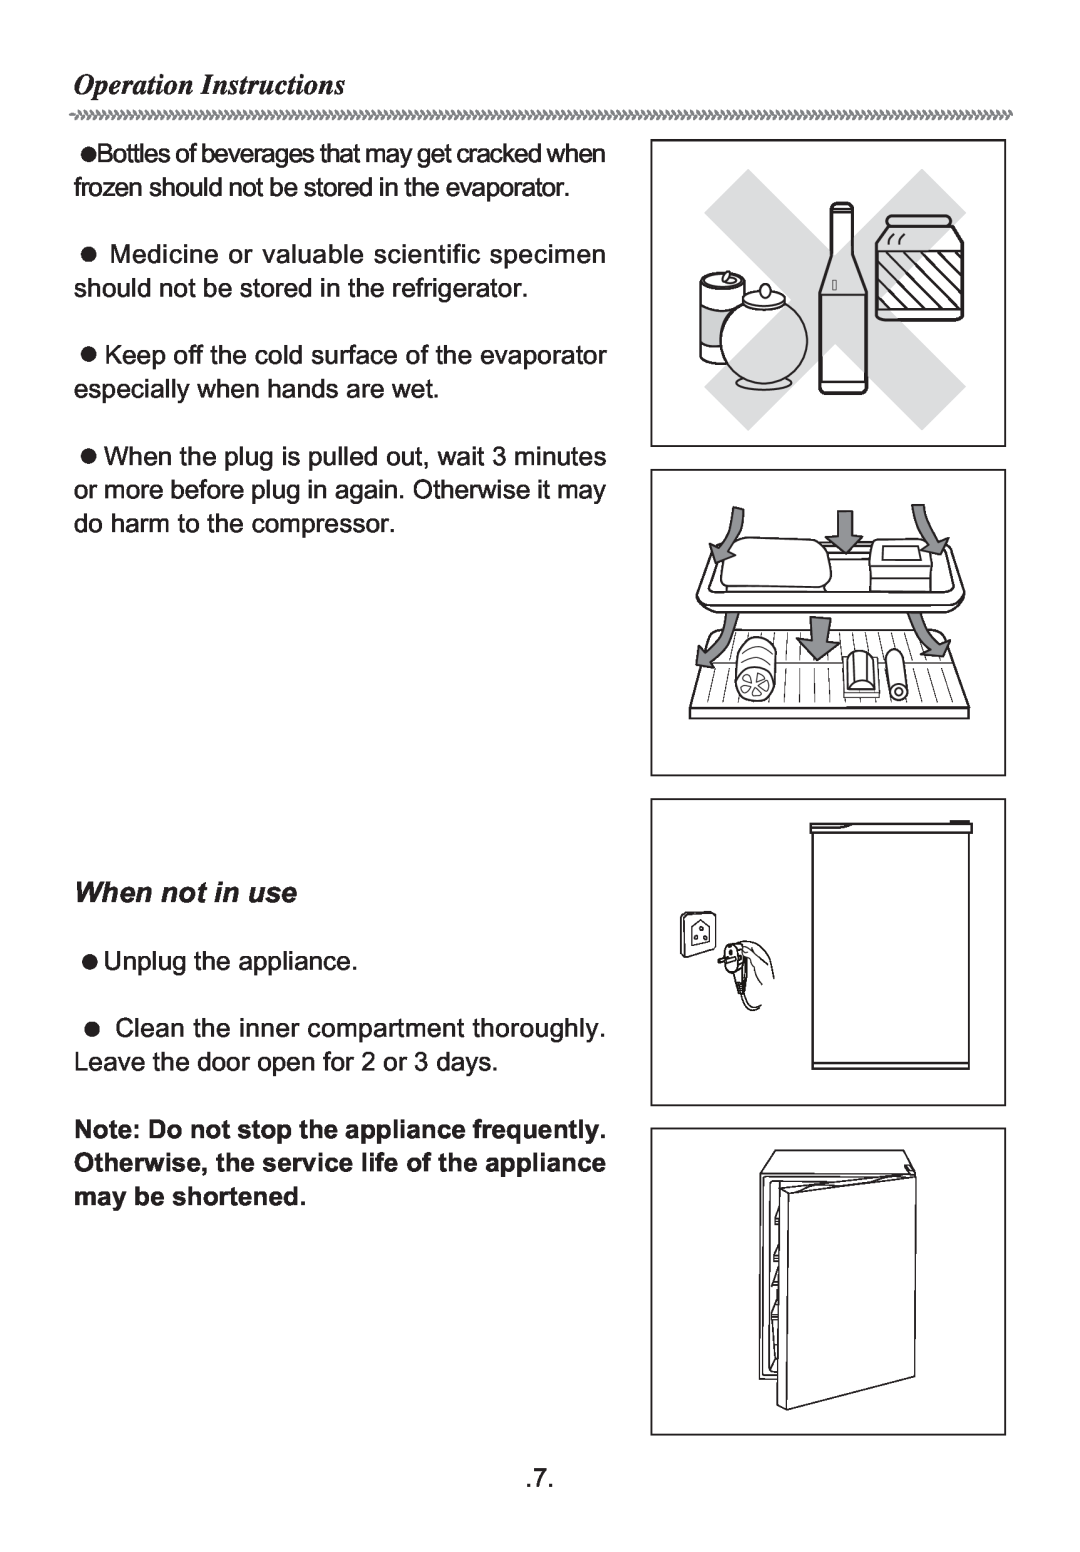 Haier HR-155S manual Operation Instructions, When not in use, Note Do not stop the appliance frequently 